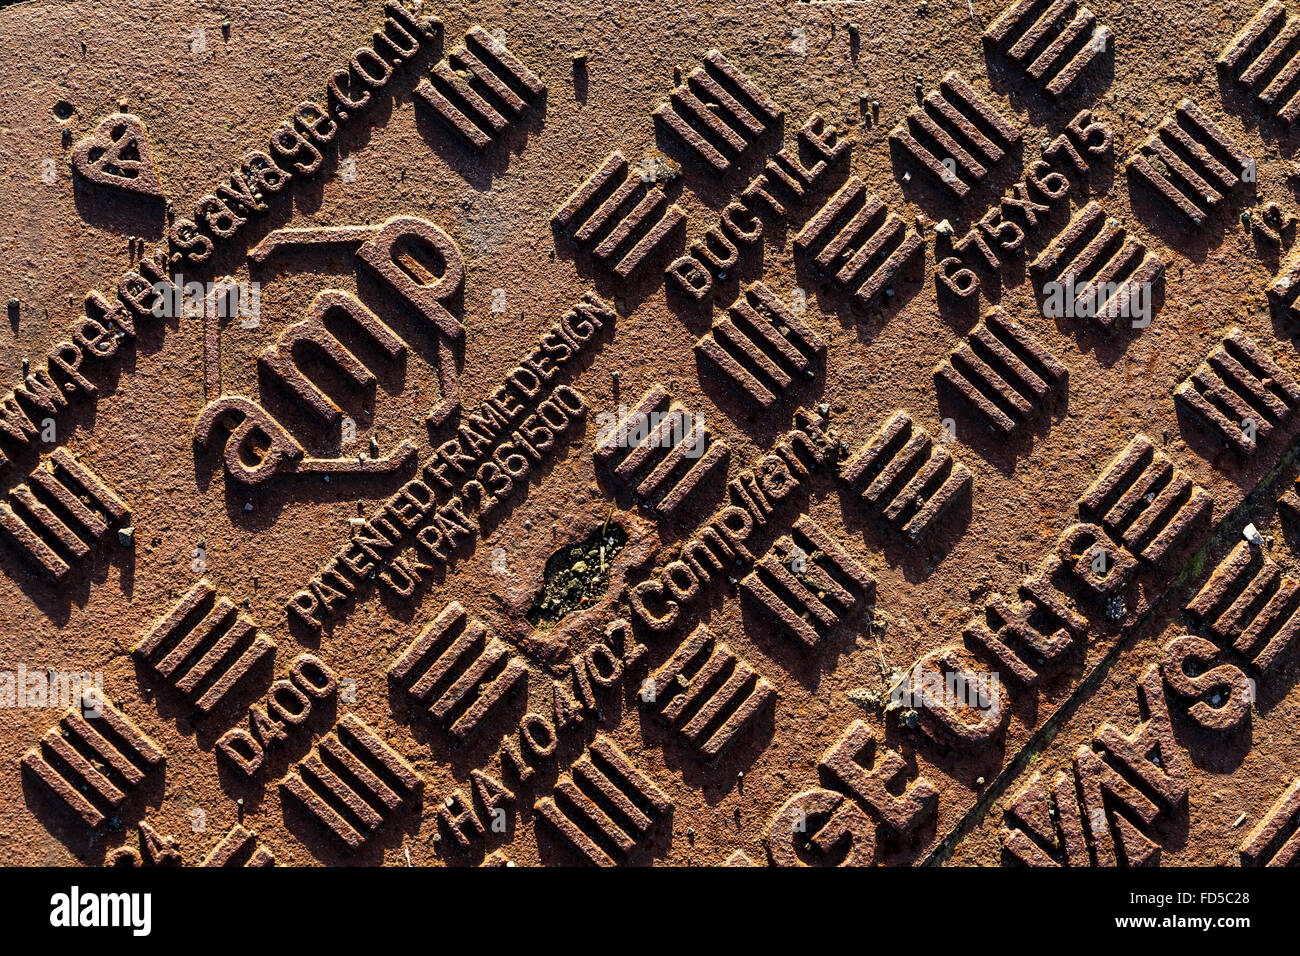 Abstract patterns of a rusty man hole cover Stock Photo